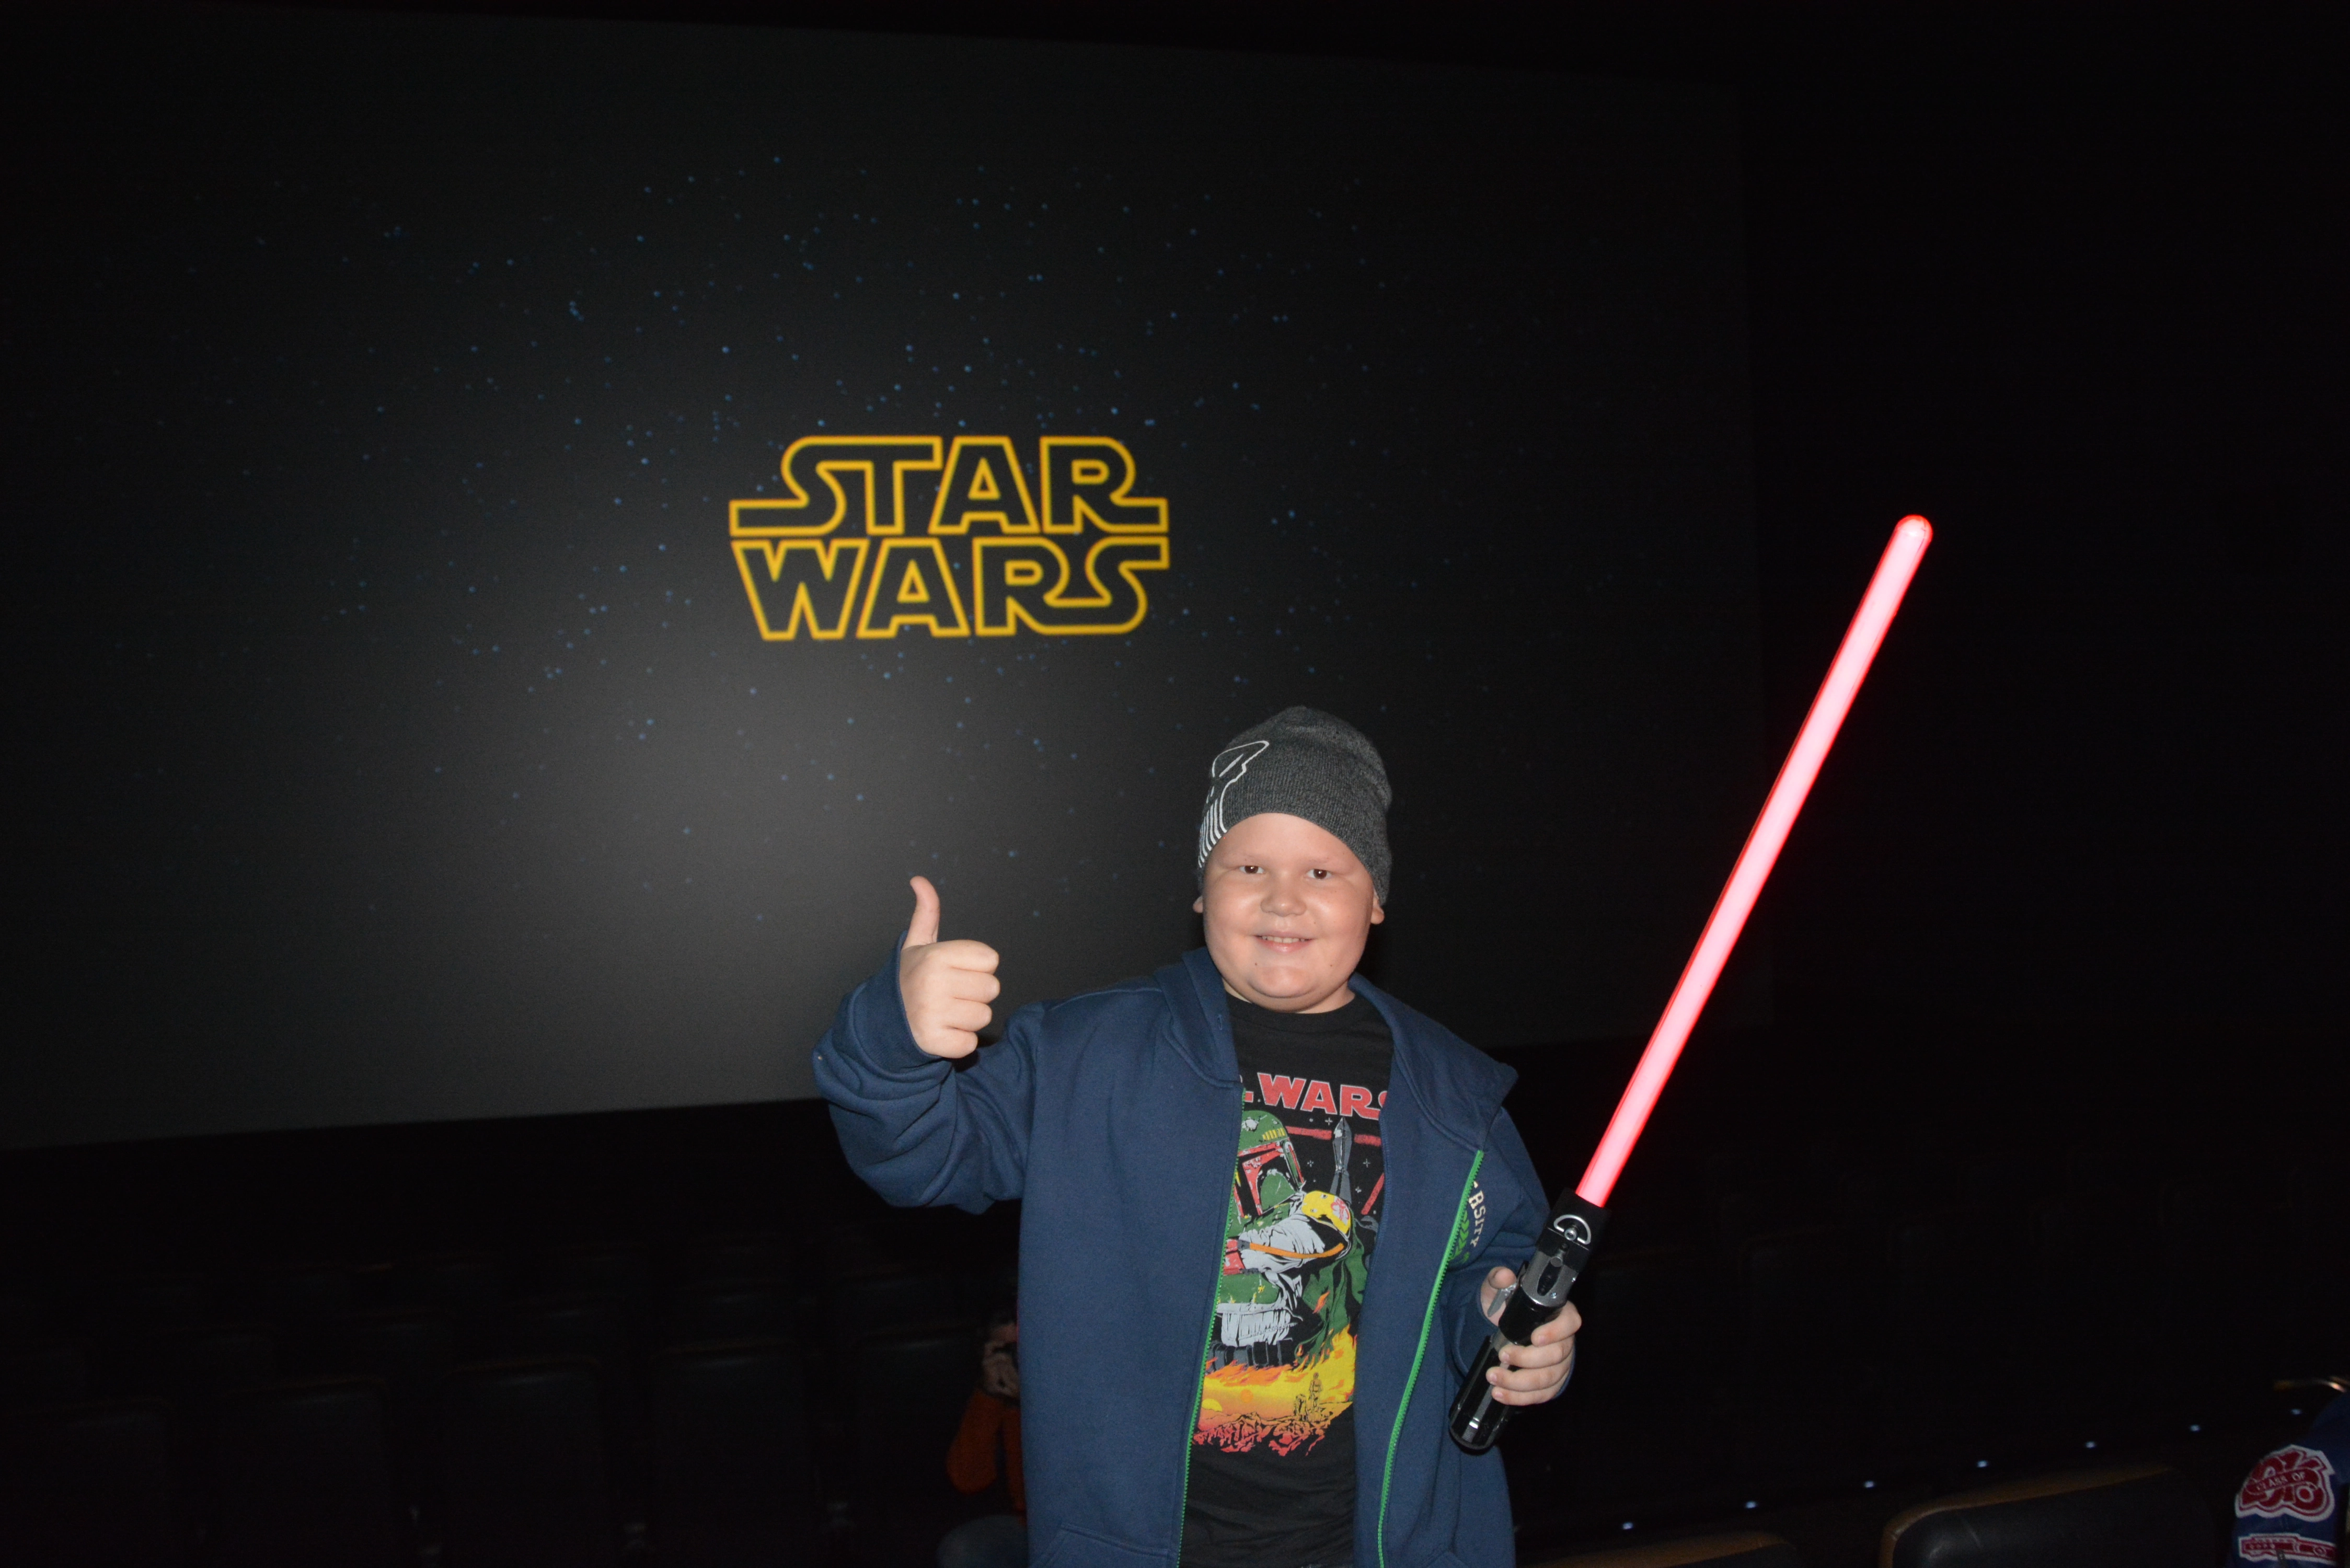 Luke was excited by the surprise trip out of the confinement of his hospital room to see the new Star Wars movie.